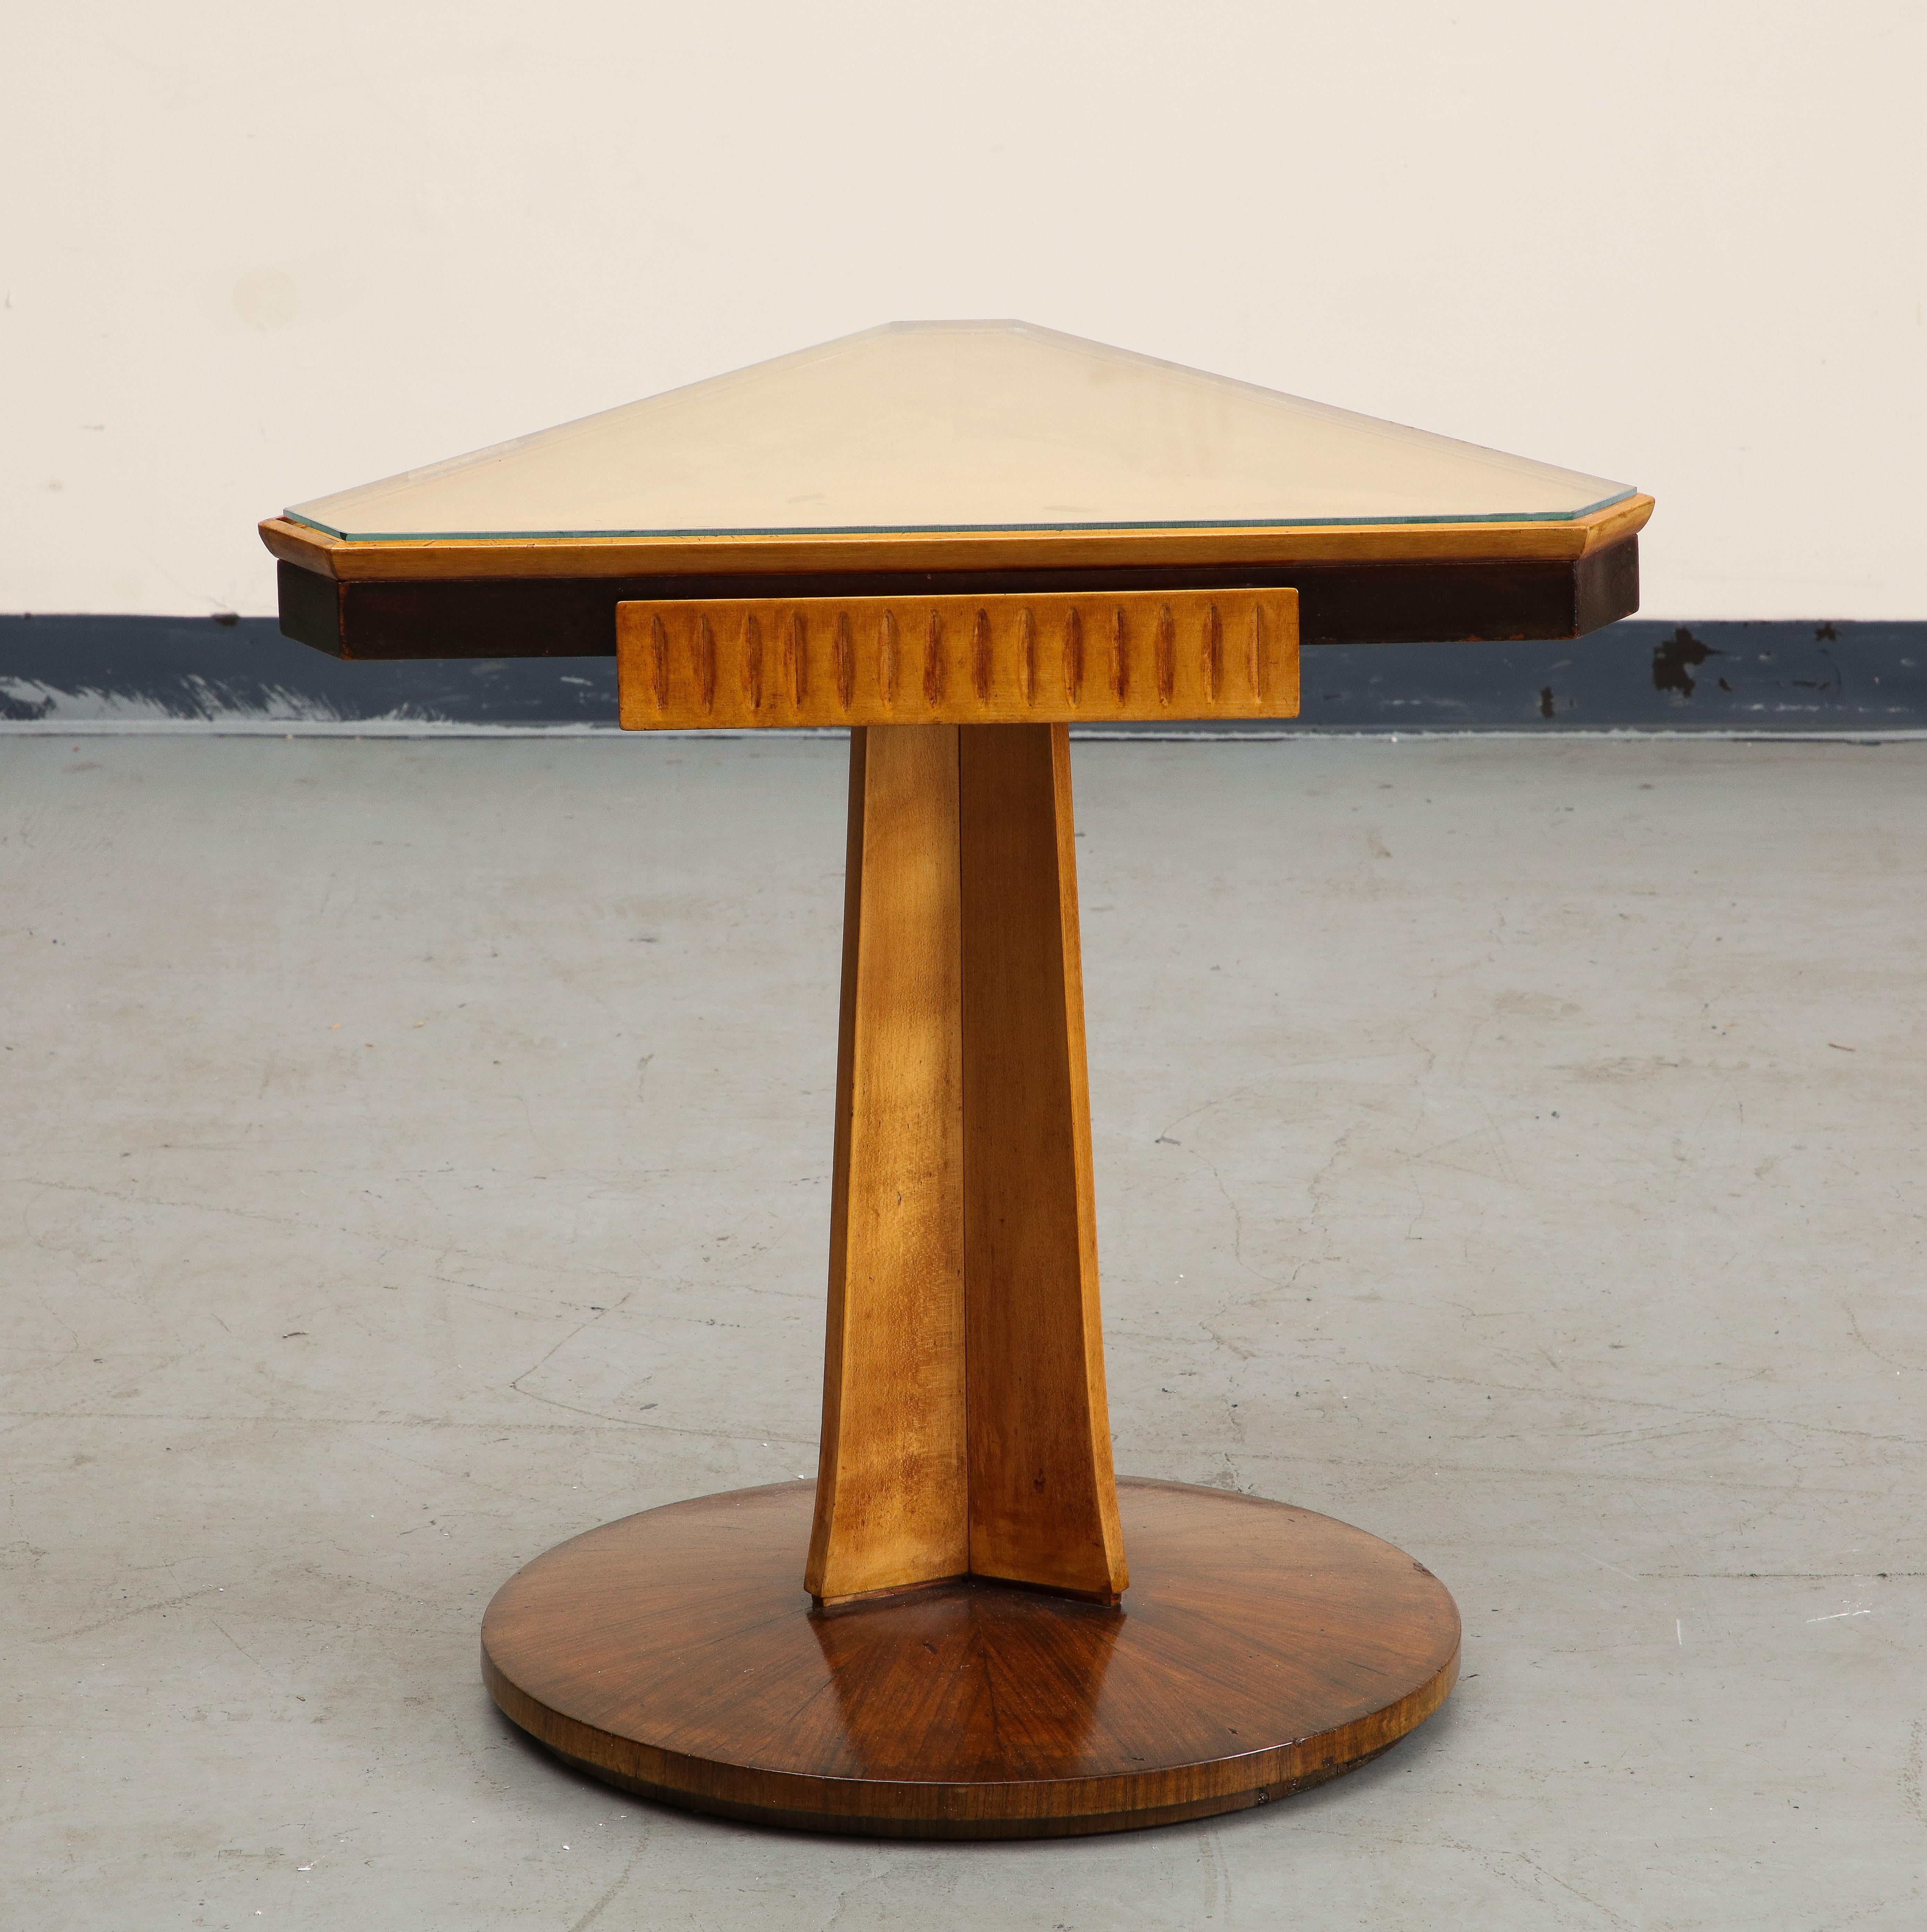 1950s Italian midcentury triangular fruitwood pedestal side table, with glass top. Handsome Art Deco details, sculptural.